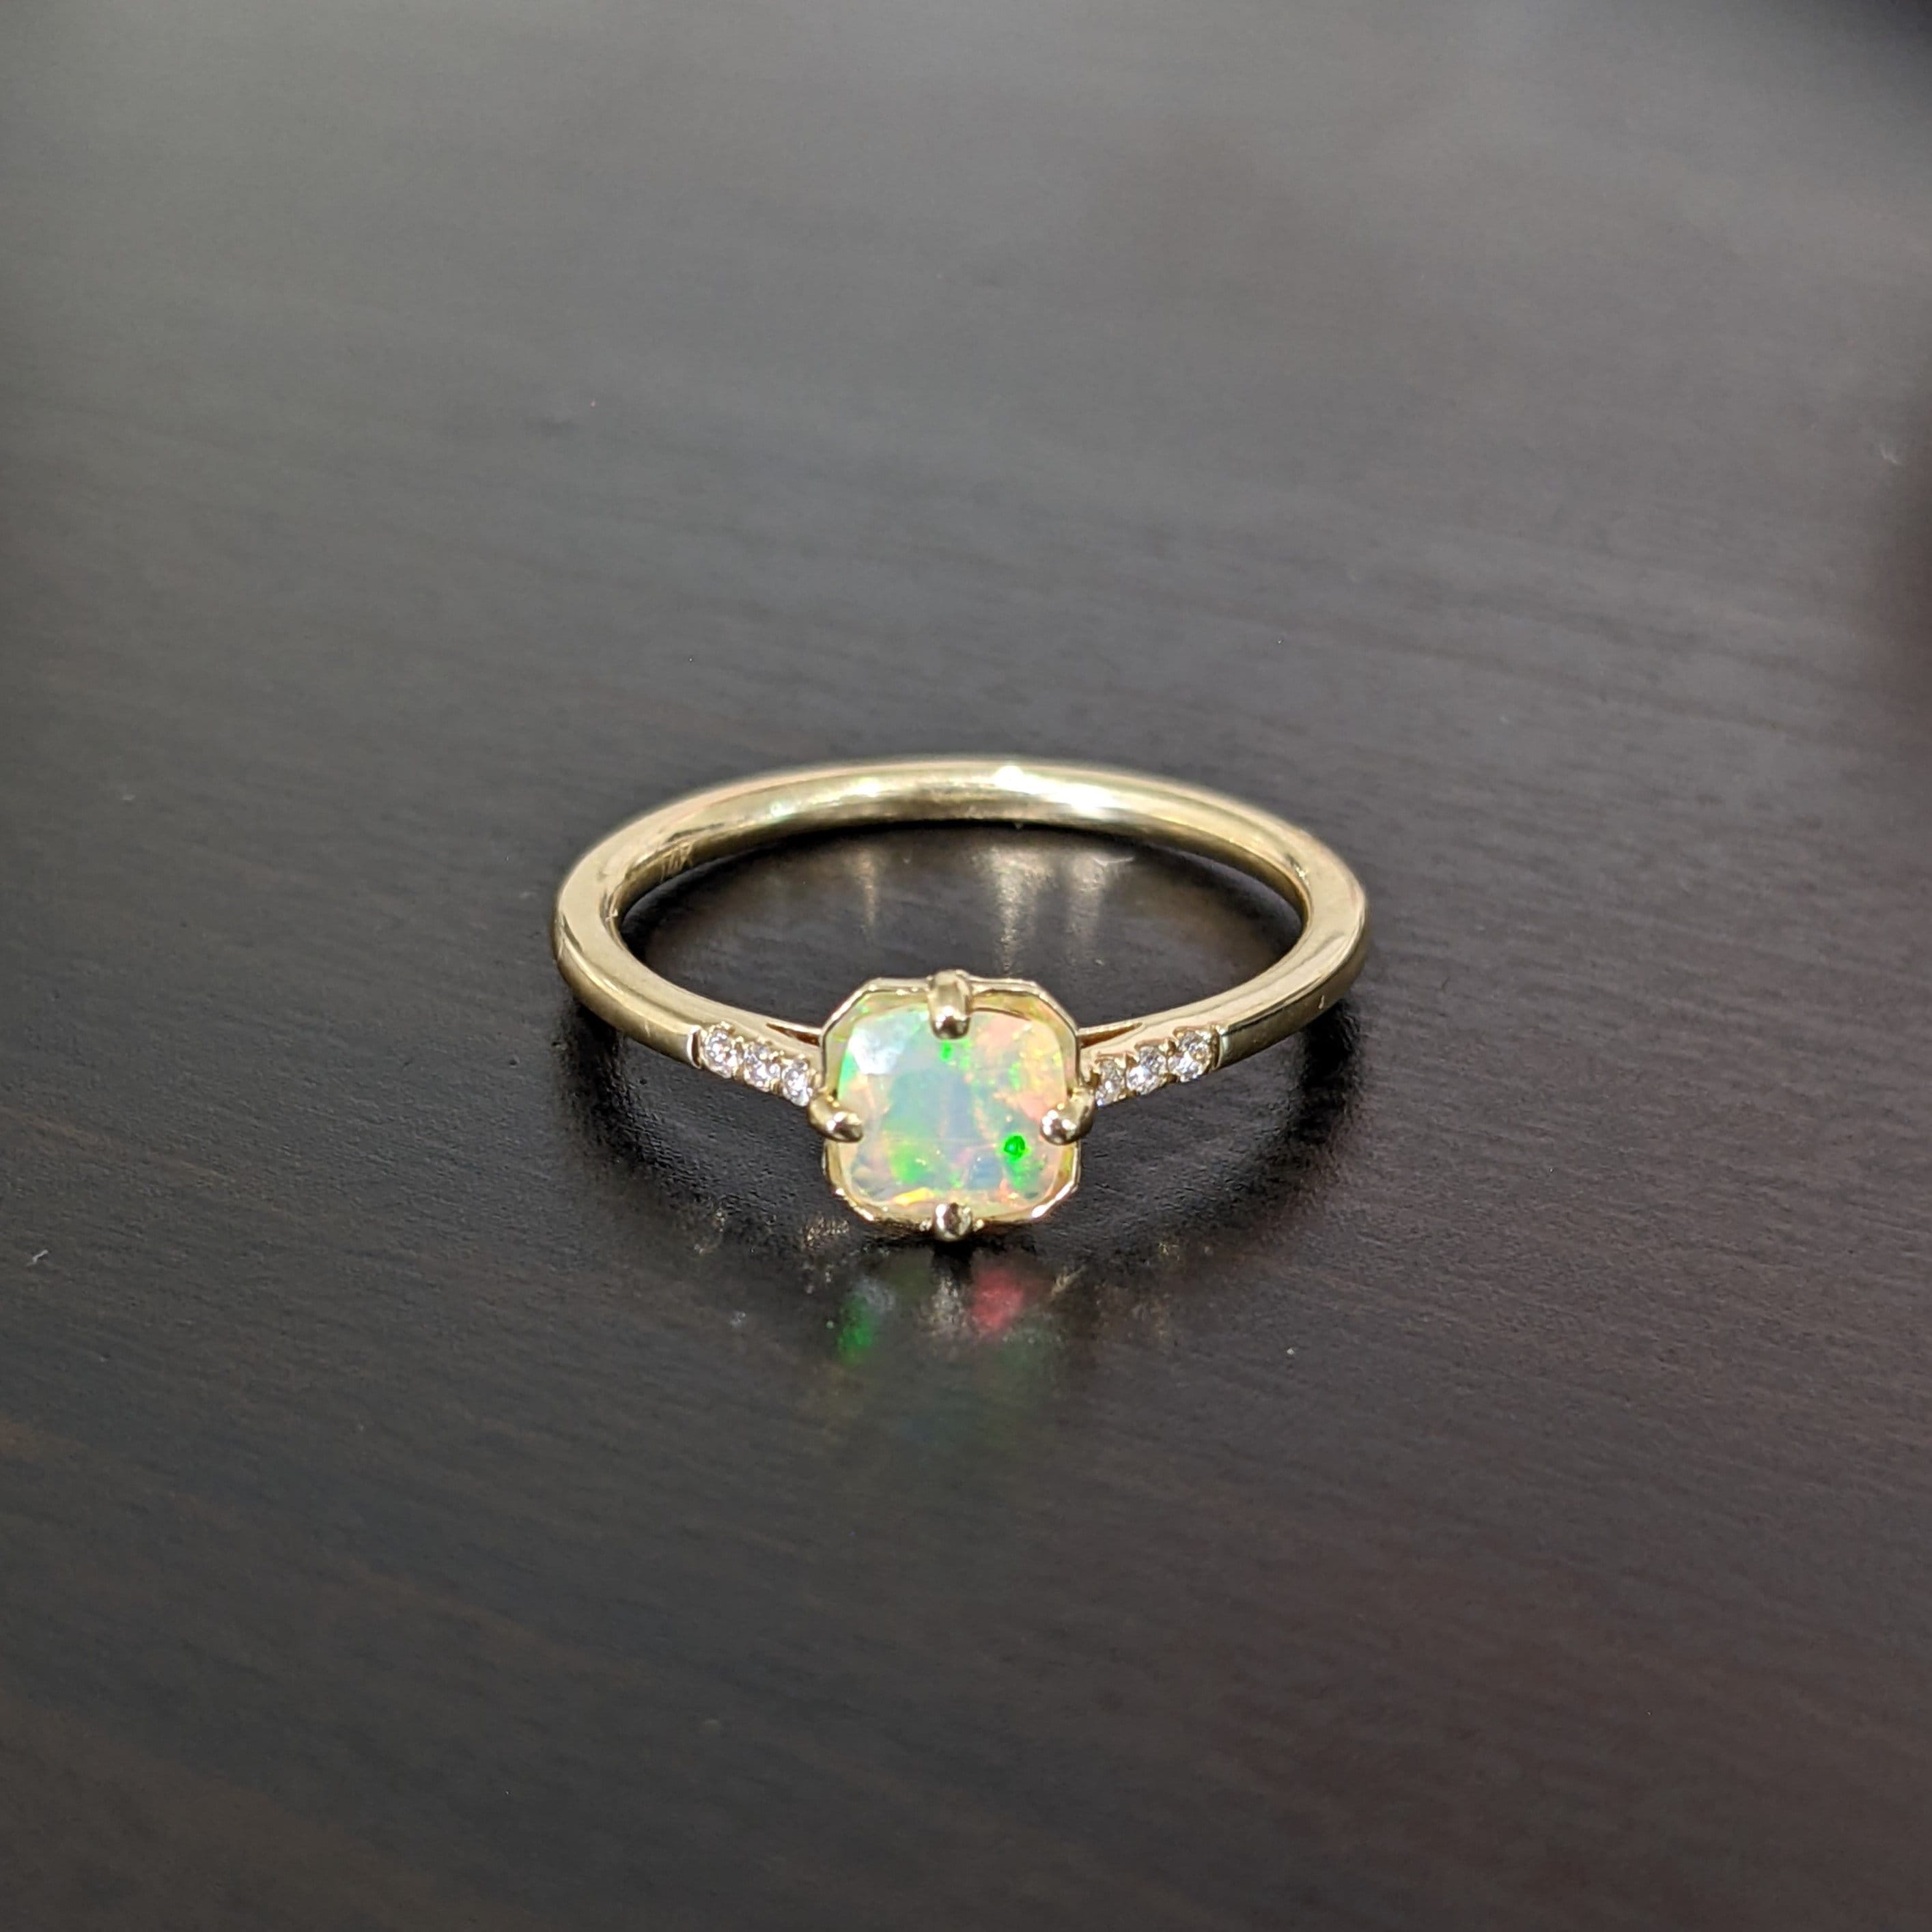 Faceted Opal Ring with Natural Diamond Accents in Solid 14k Yellow Gold | Cushion 6mm | Compass Prong |Gemstone Jewelry | October Birthstone